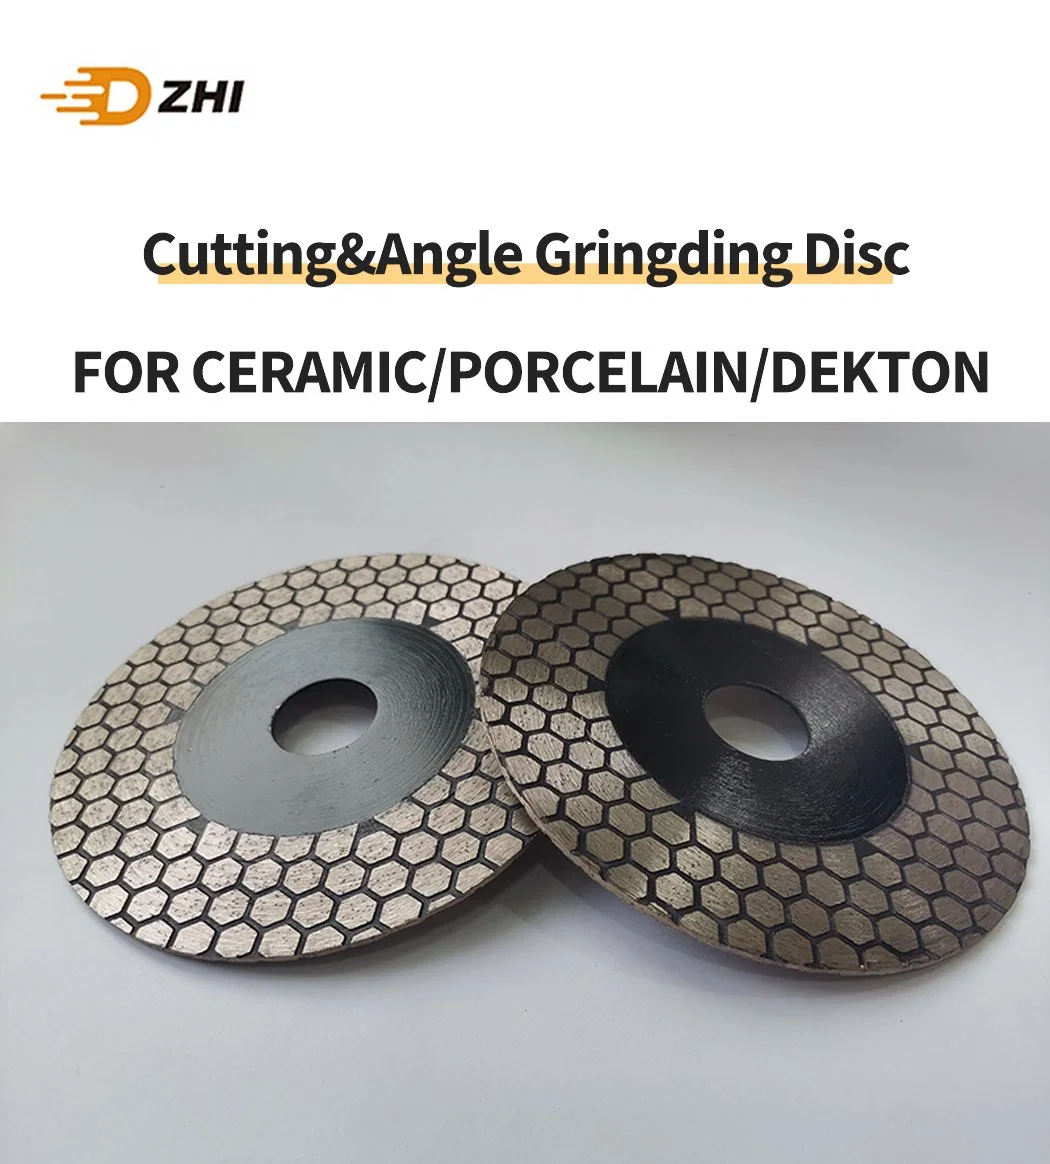 China Factory Hexagon Turbo 115mm 125mm 2 in 1 Dual-Purpose Cutting-Angle Grinding Mitering Disc for Cutting Ceramic/Porcelain /Dekton Tiles Diamond Saw Blade